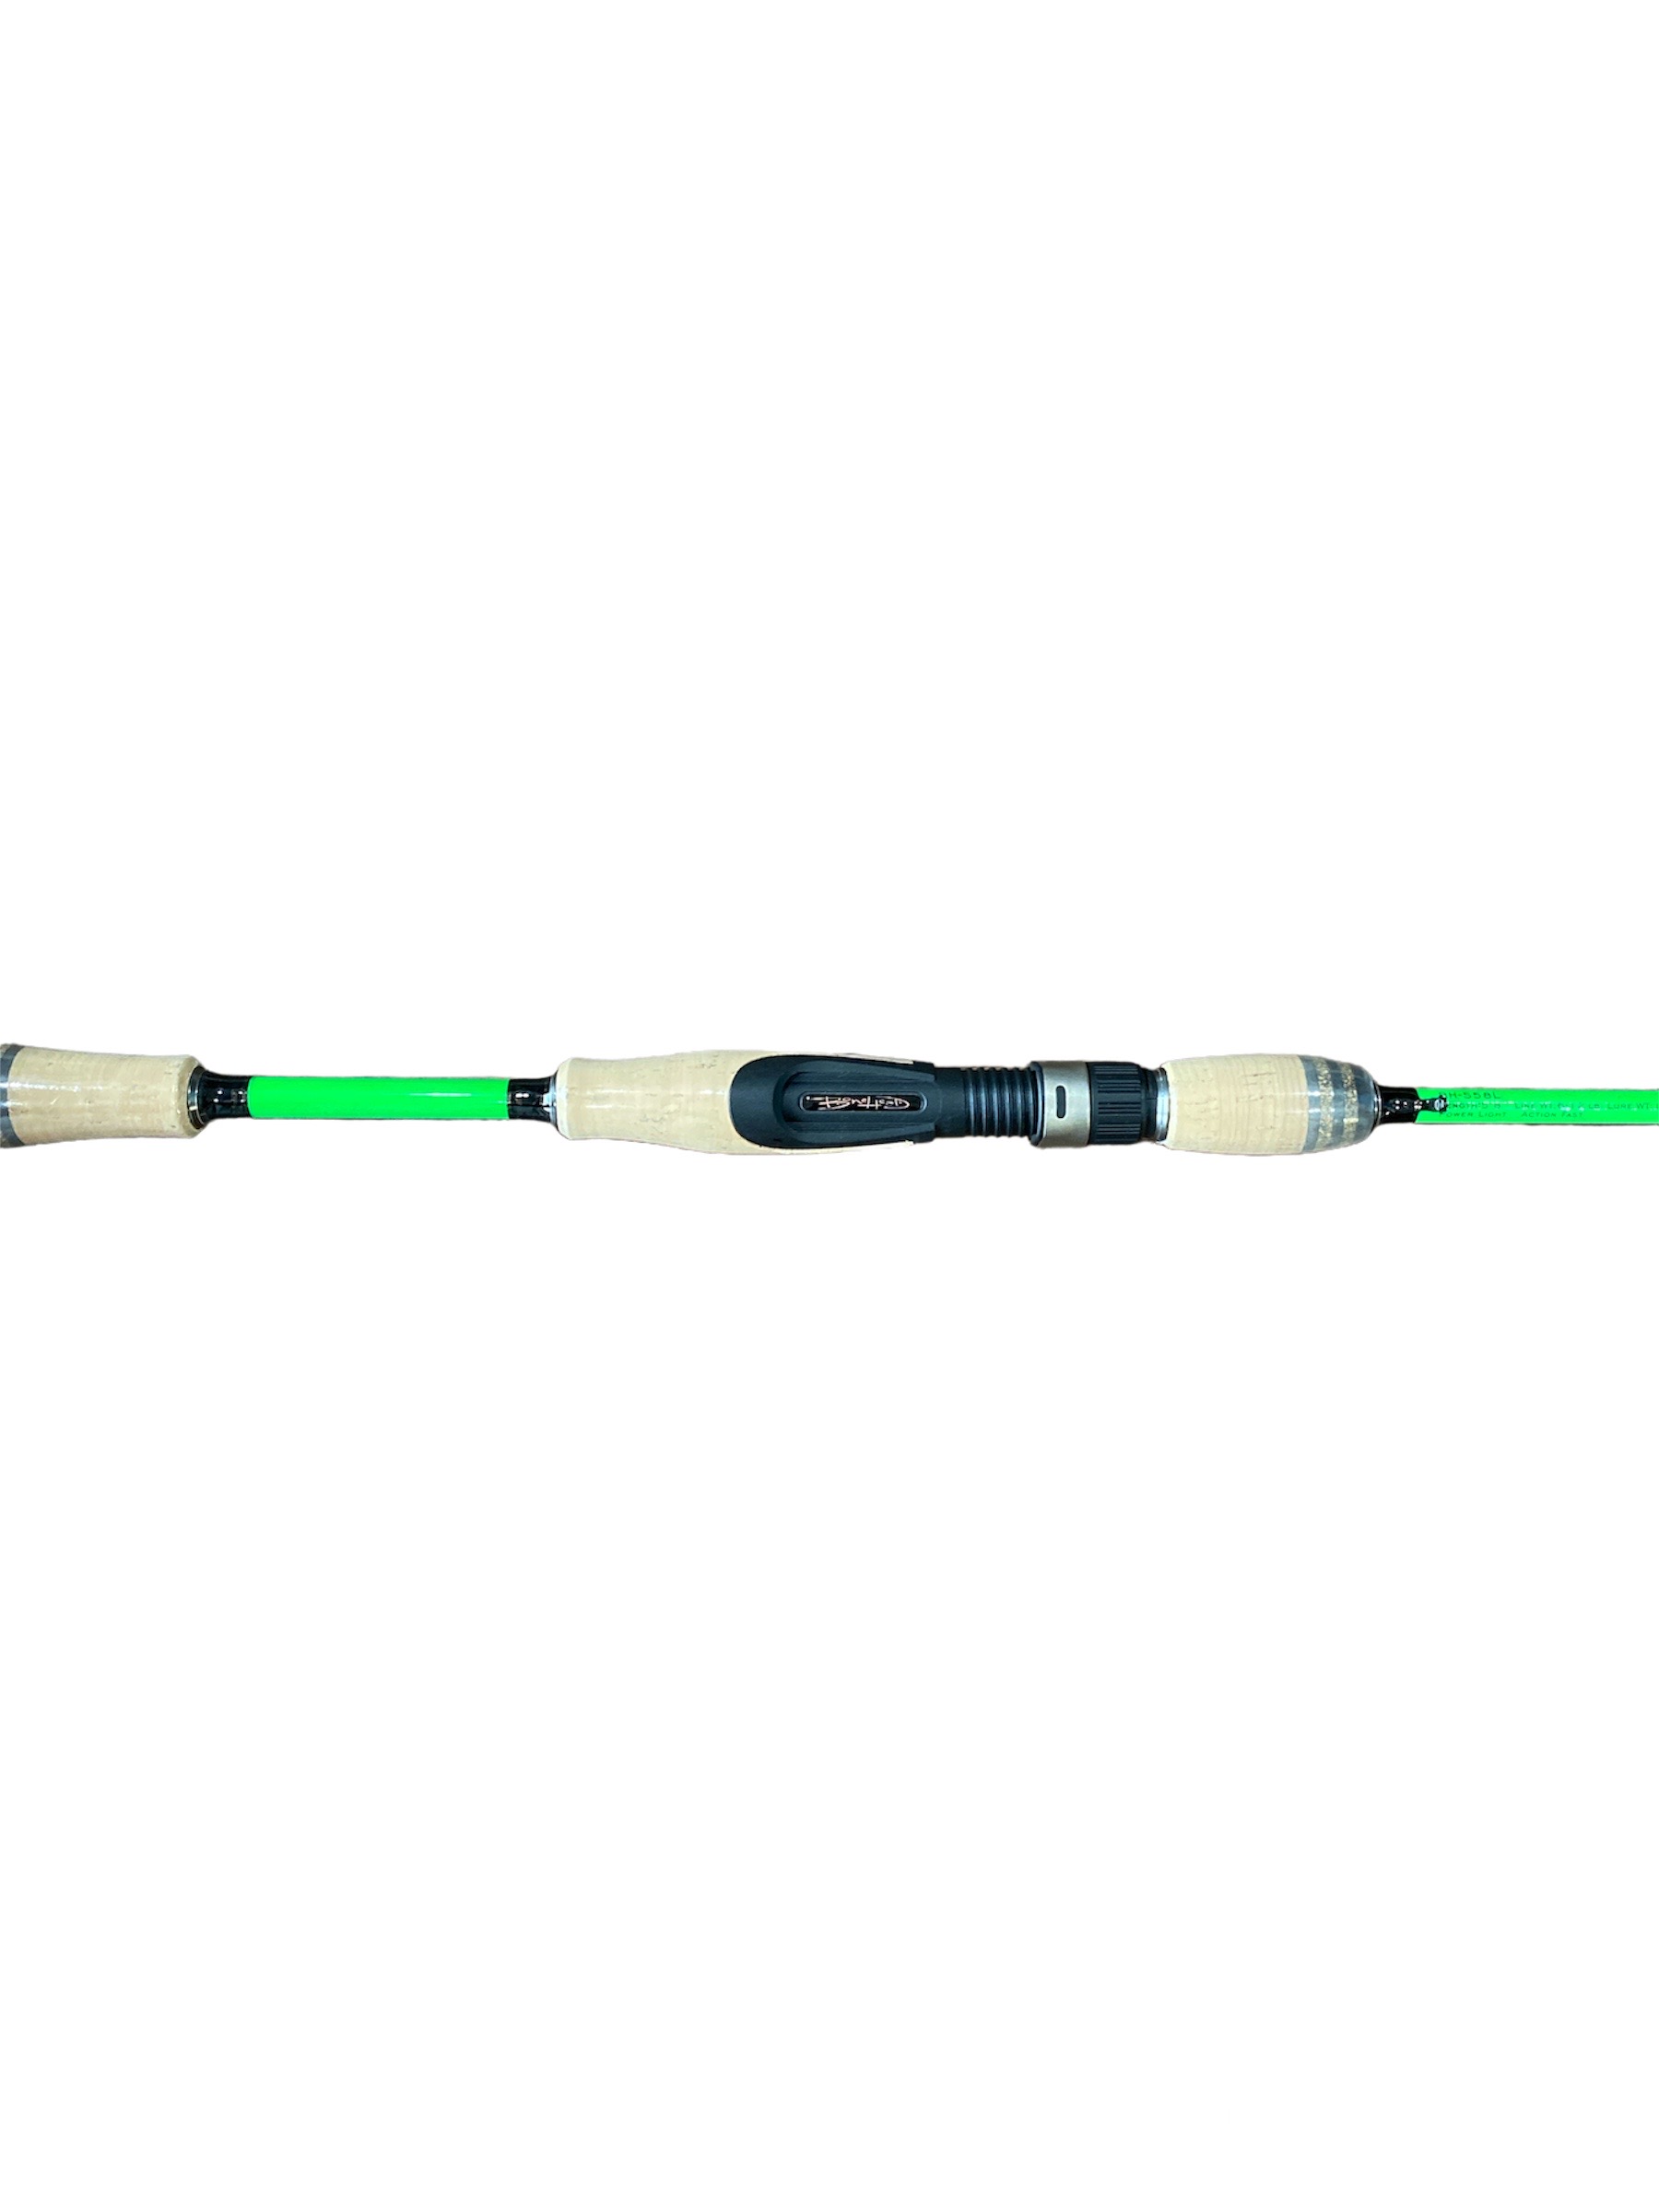 BoneHead Tackle 8' and 7' Rods..